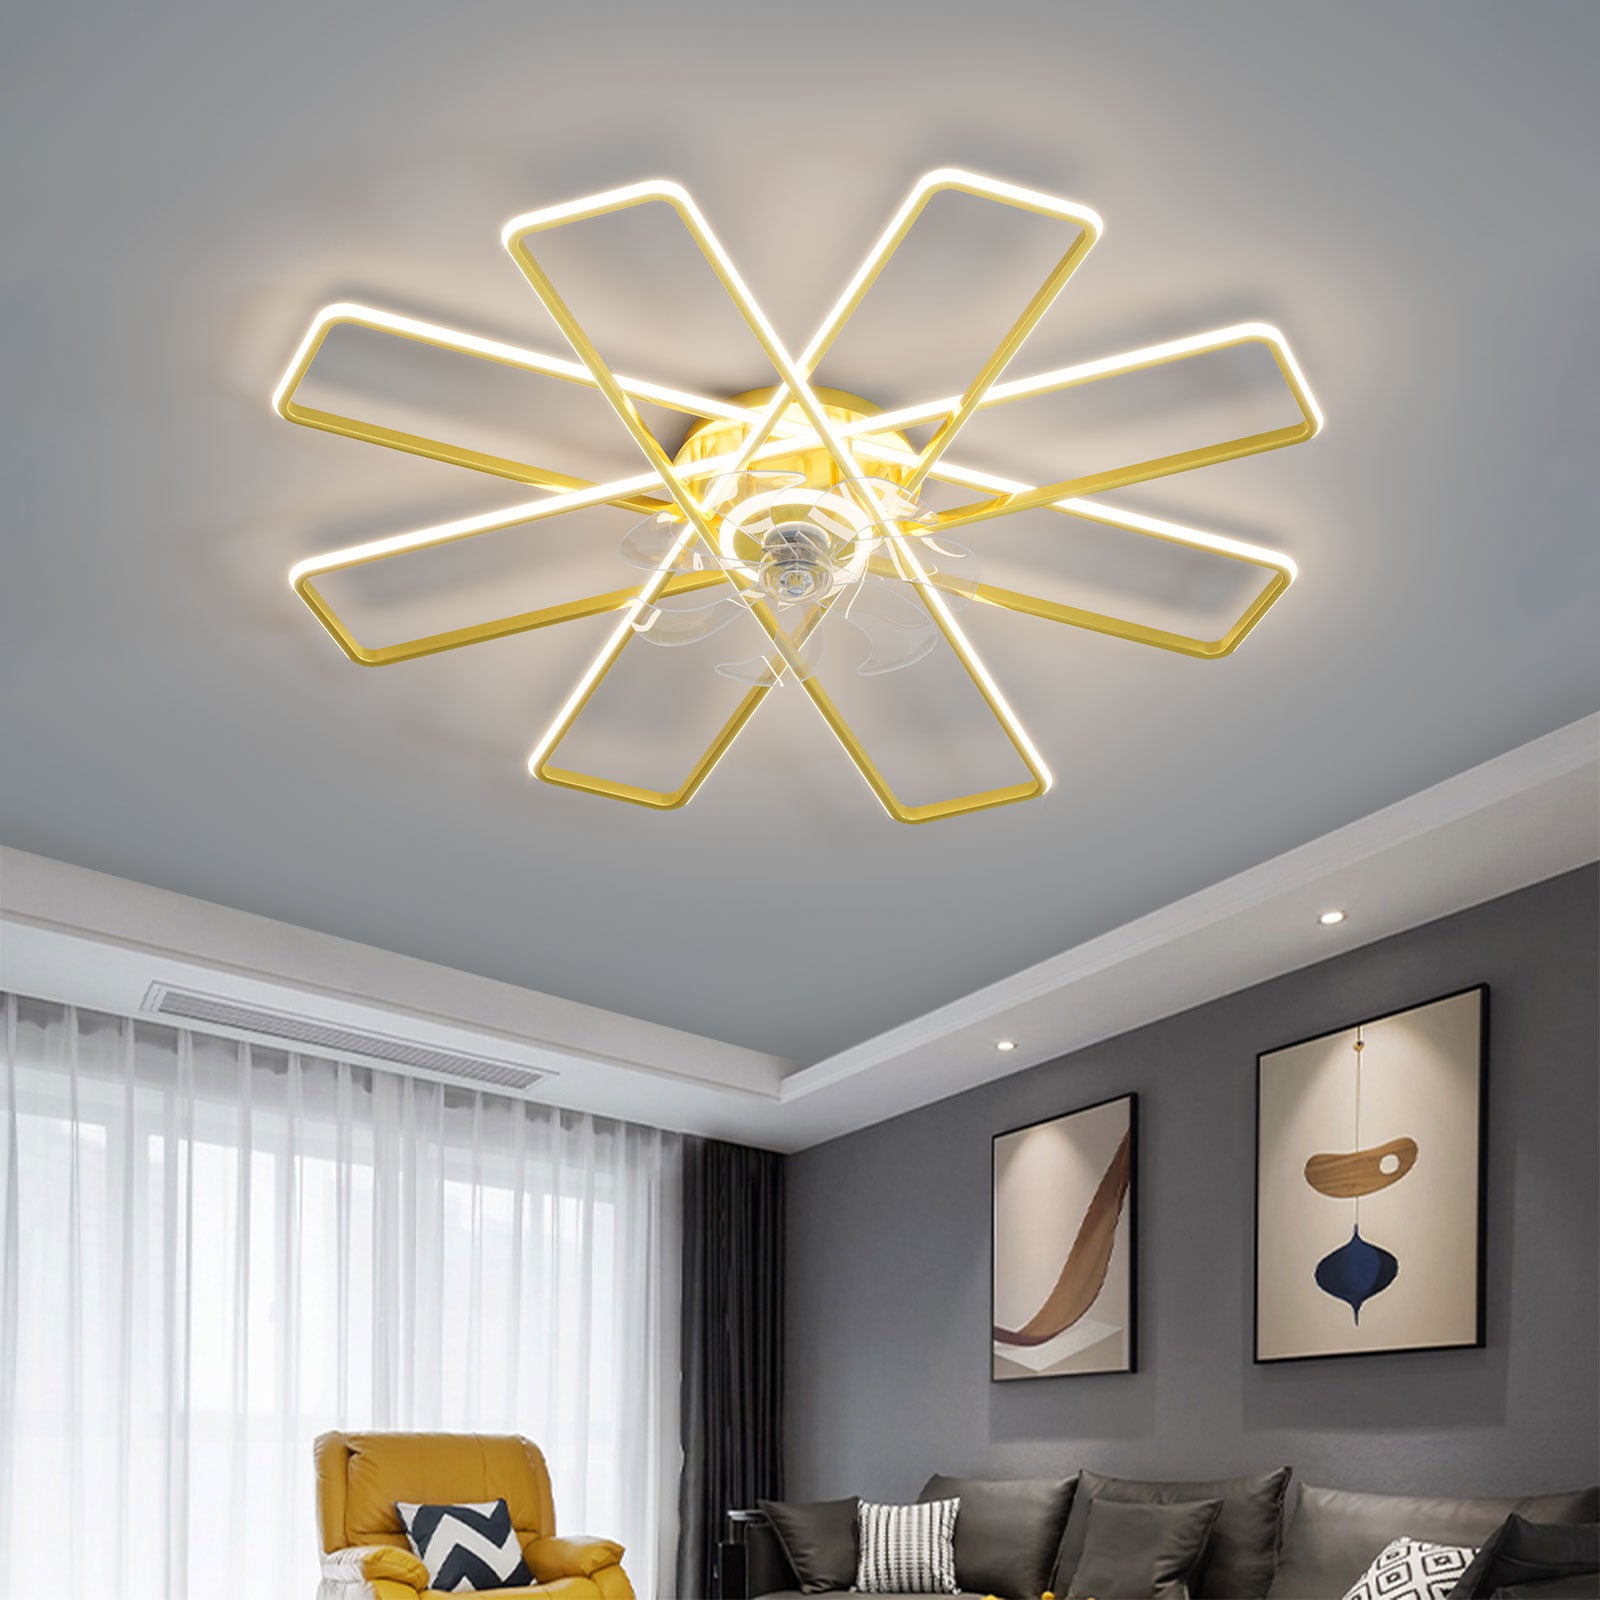 REYDELUZ Ceiling Fan with Lamp 19.6-Inch 60w Fan Lamp with Remote Control and Dimmability Invisible Fan Blade 6-Speed Wind Speed Suitable for Bedroom and Dining Room